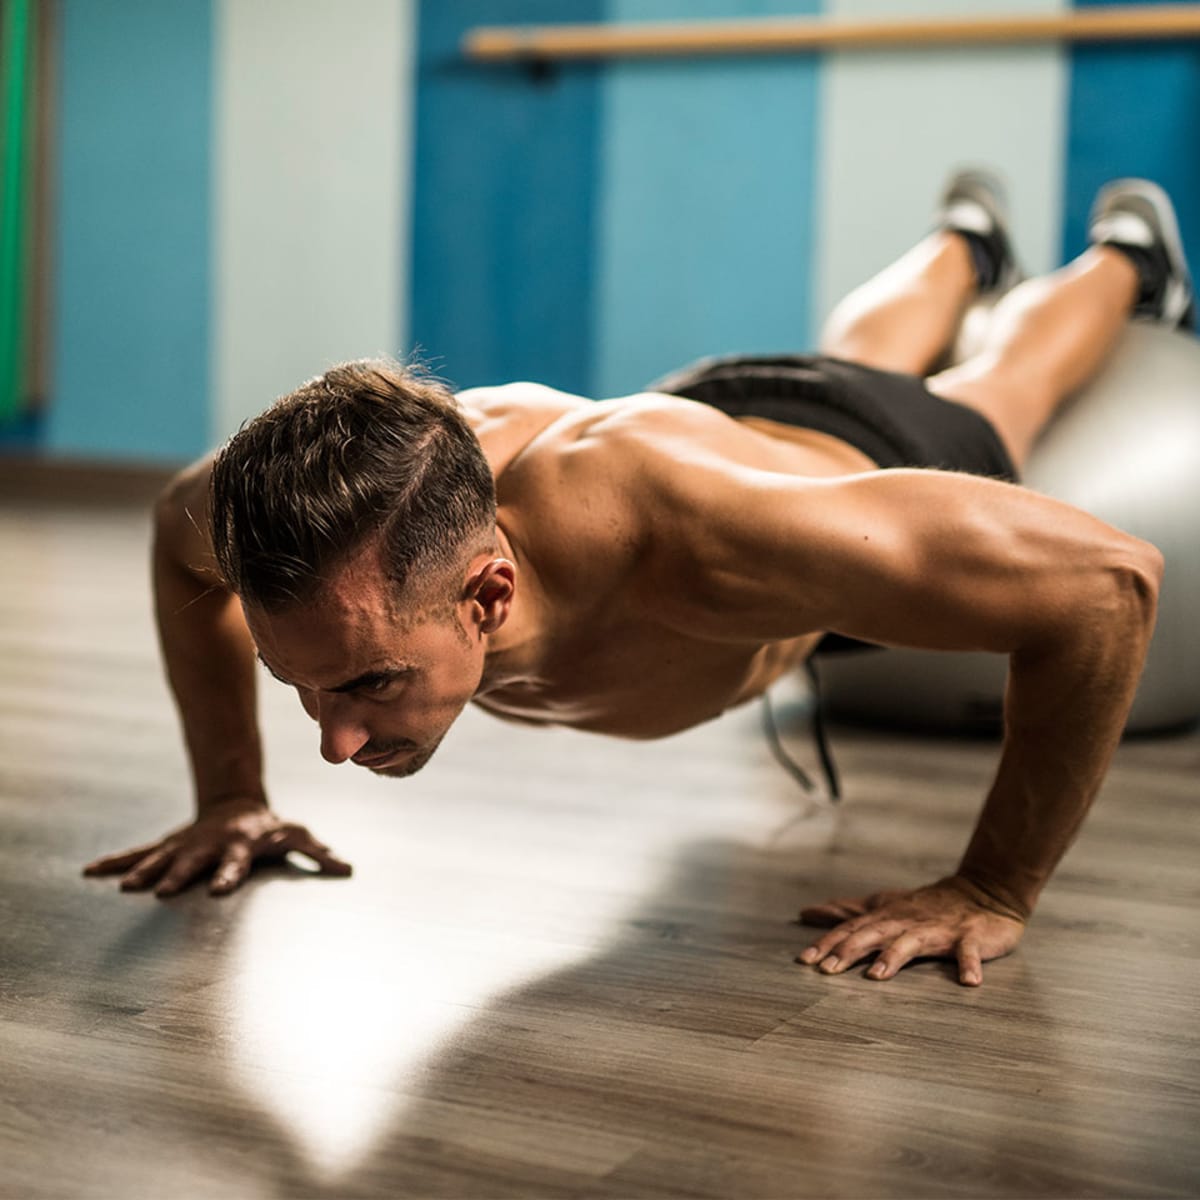 50 Core Exercises That Require a Ball - Men's Journal